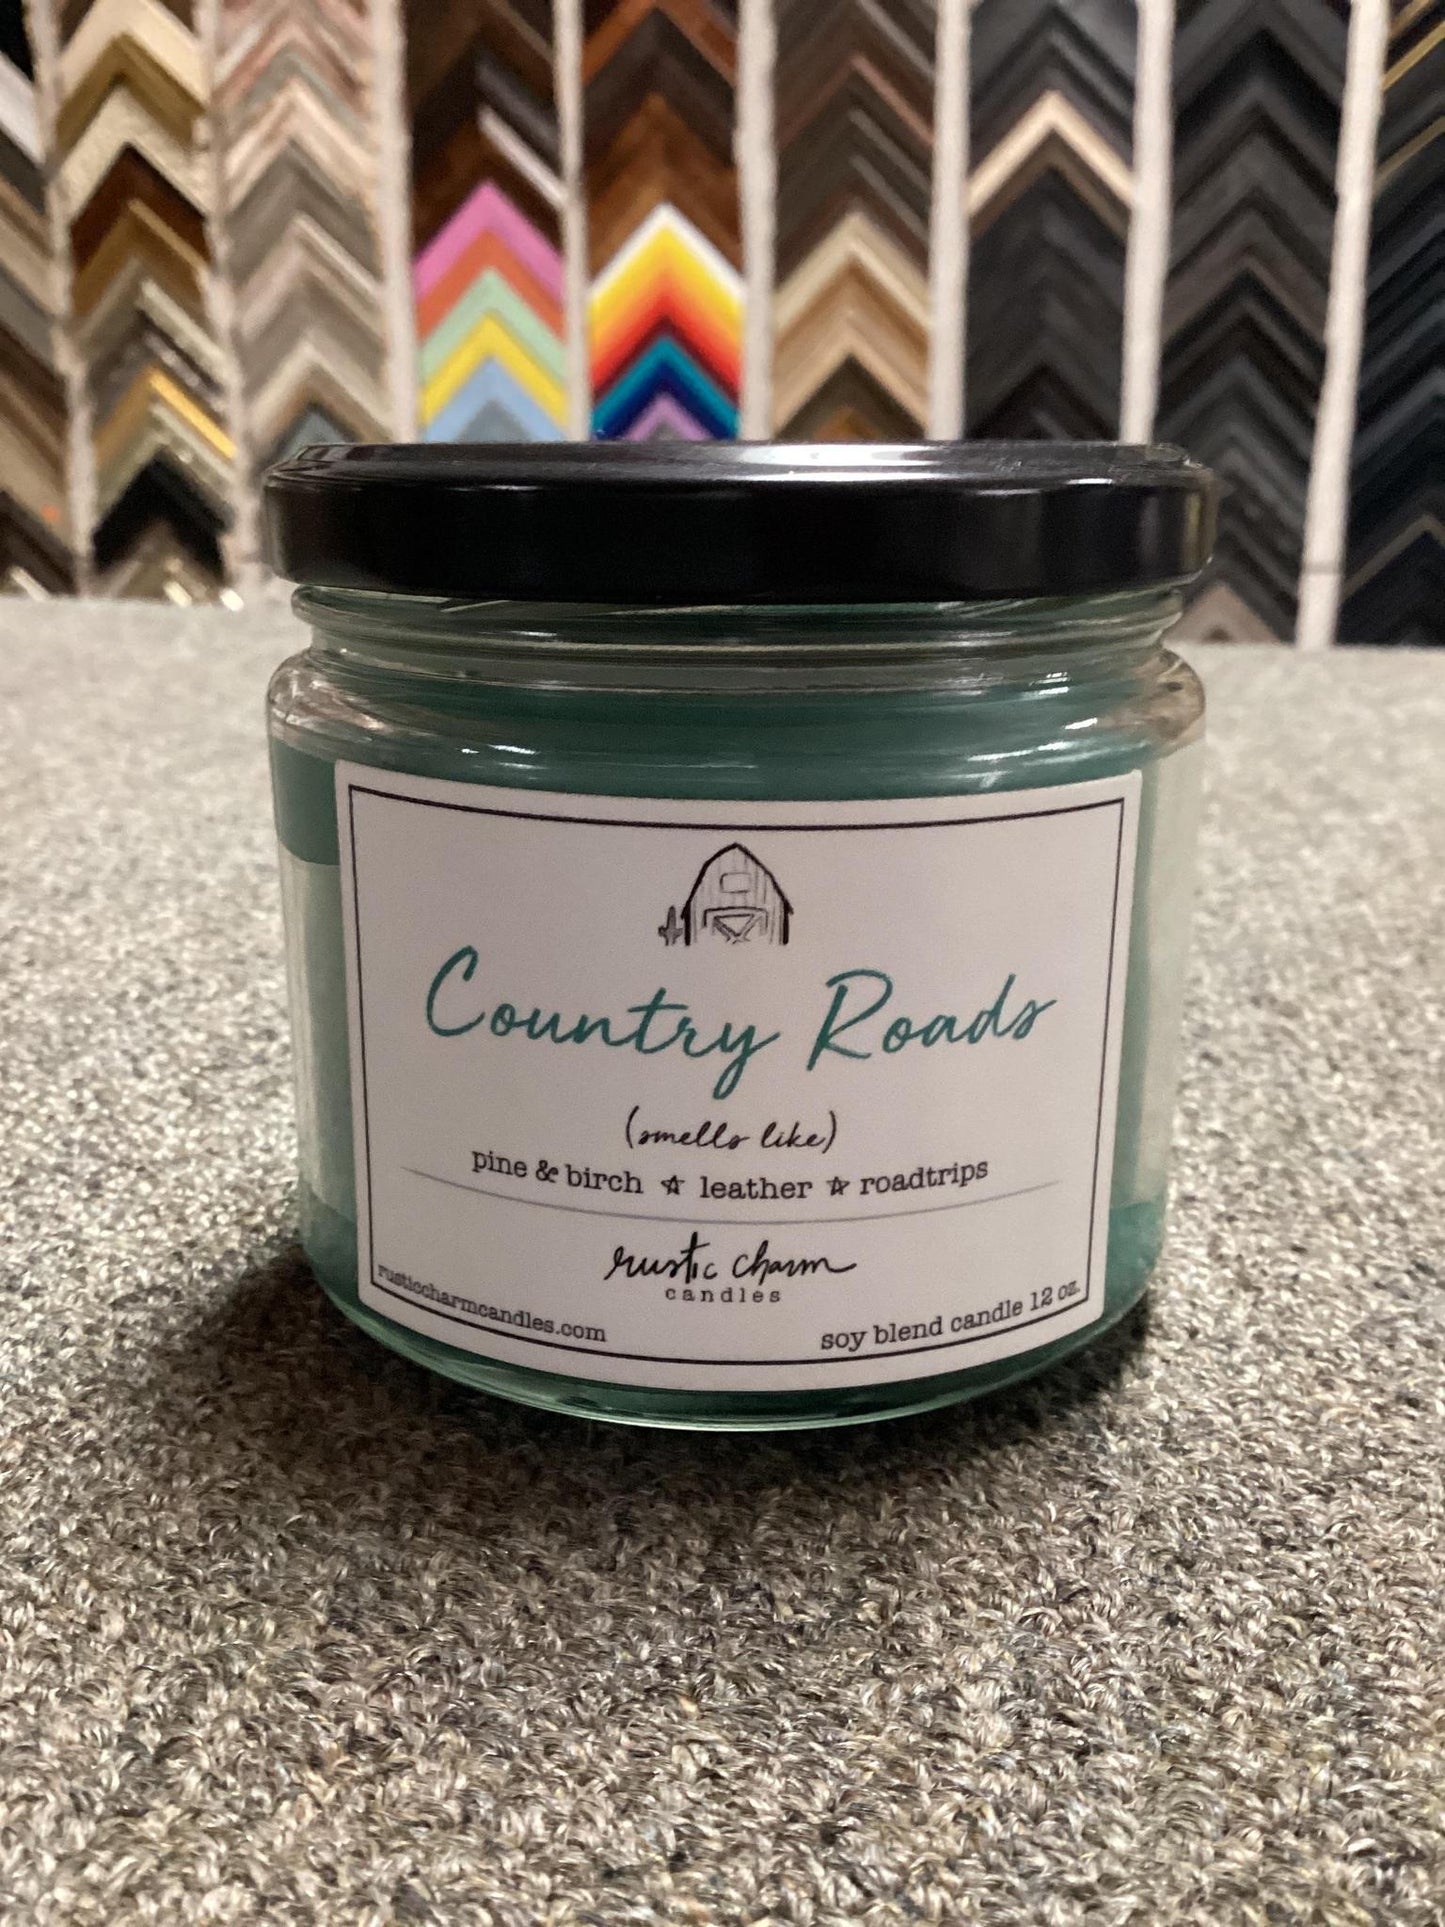 "Country Roads" Candle -Rustic Charm